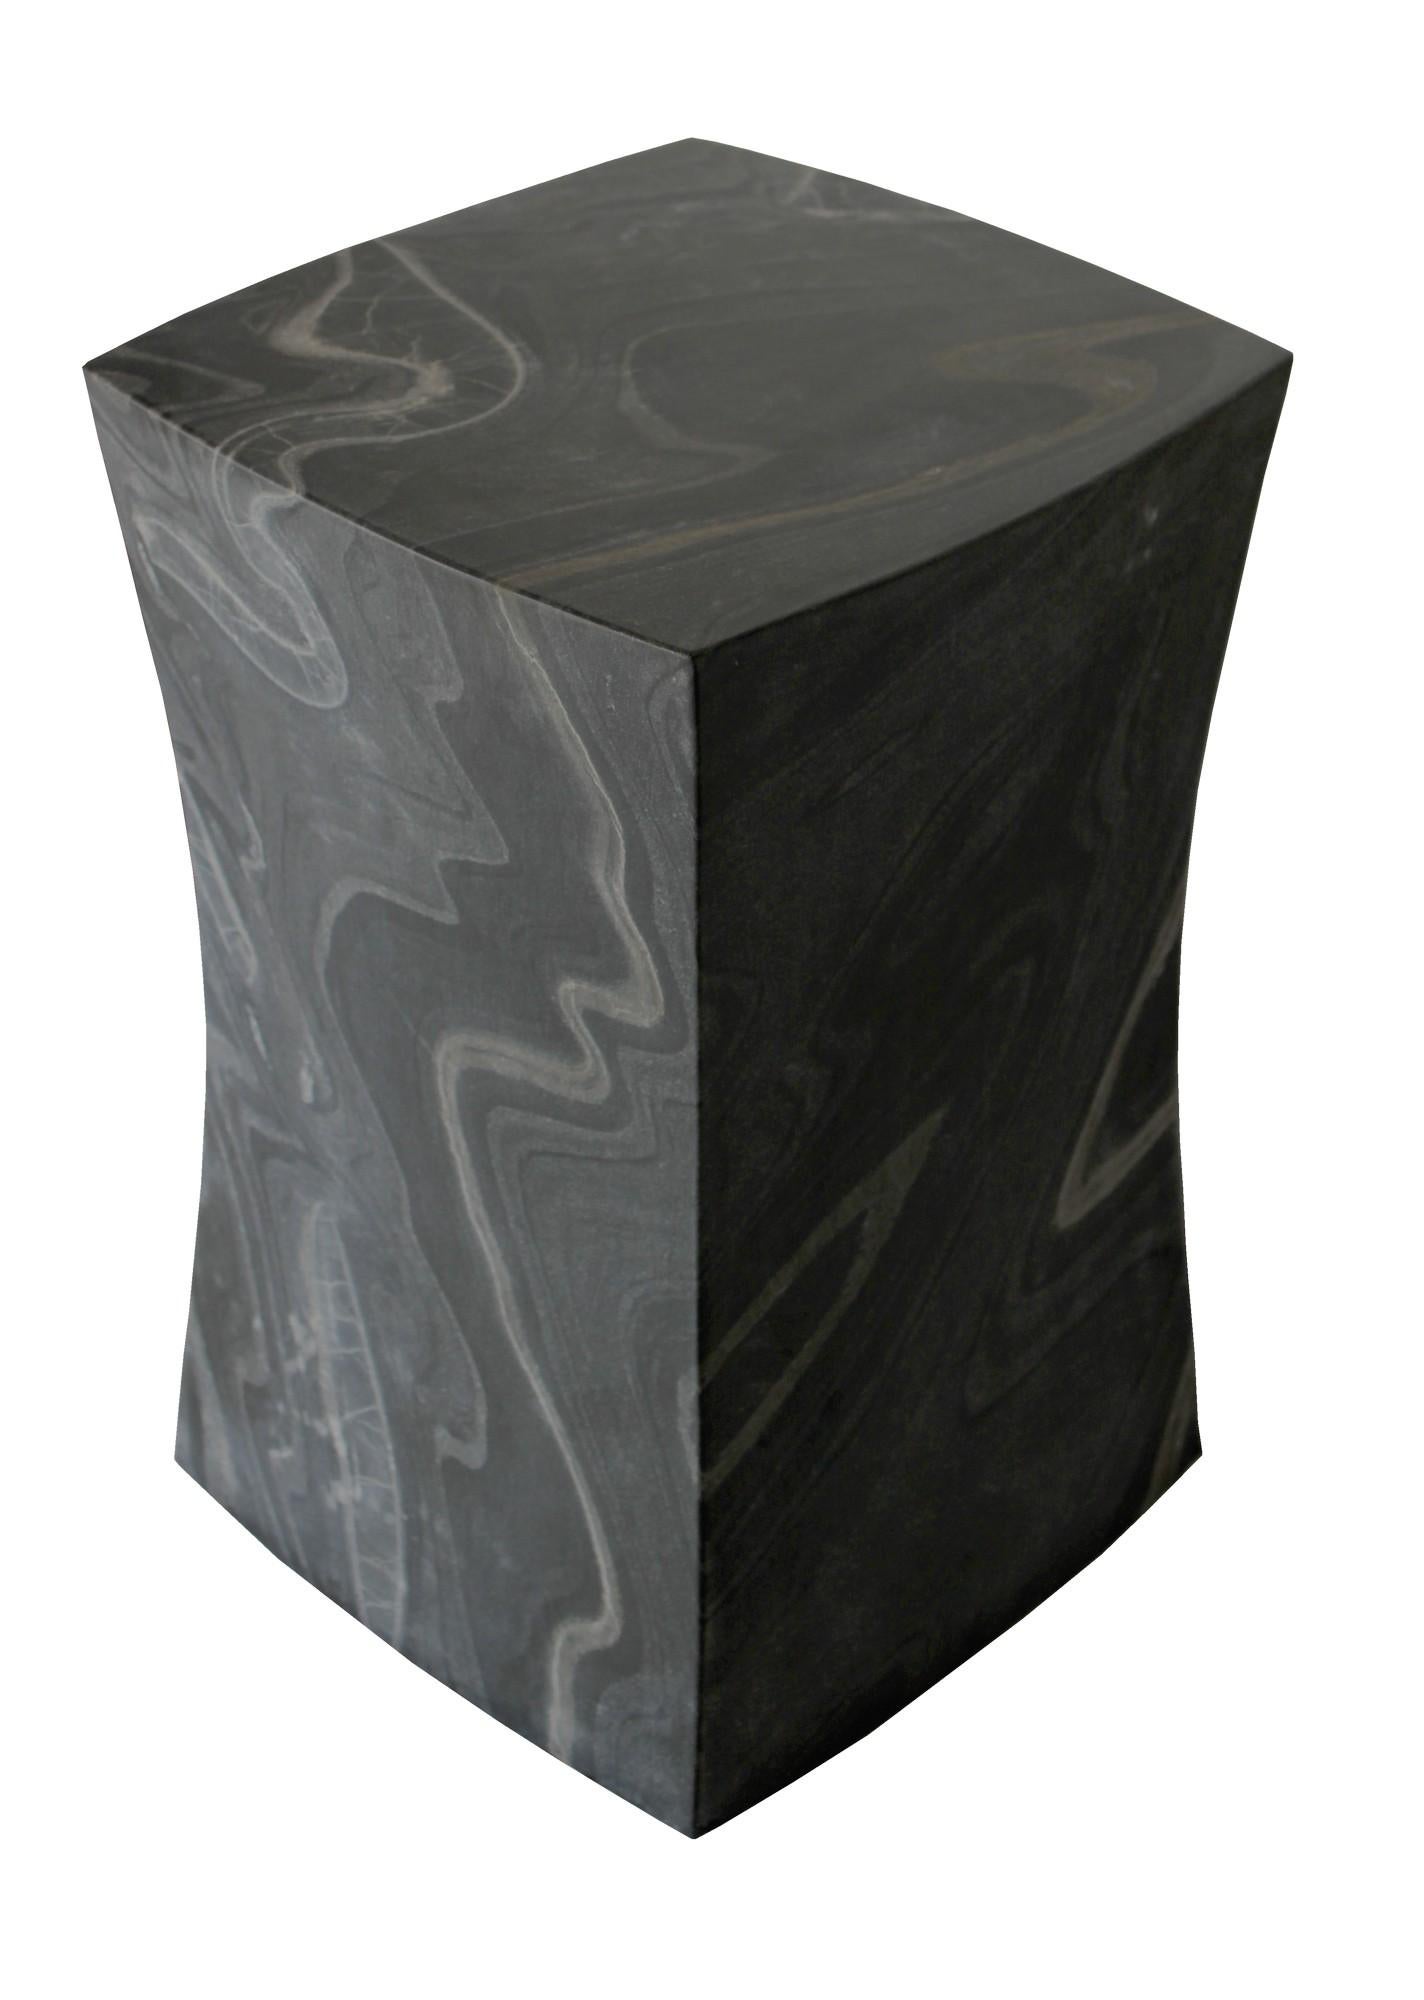 Hand-Carved Jour Block Table in Black Marble by Paul Mathieu for Stephanie Odegard For Sale